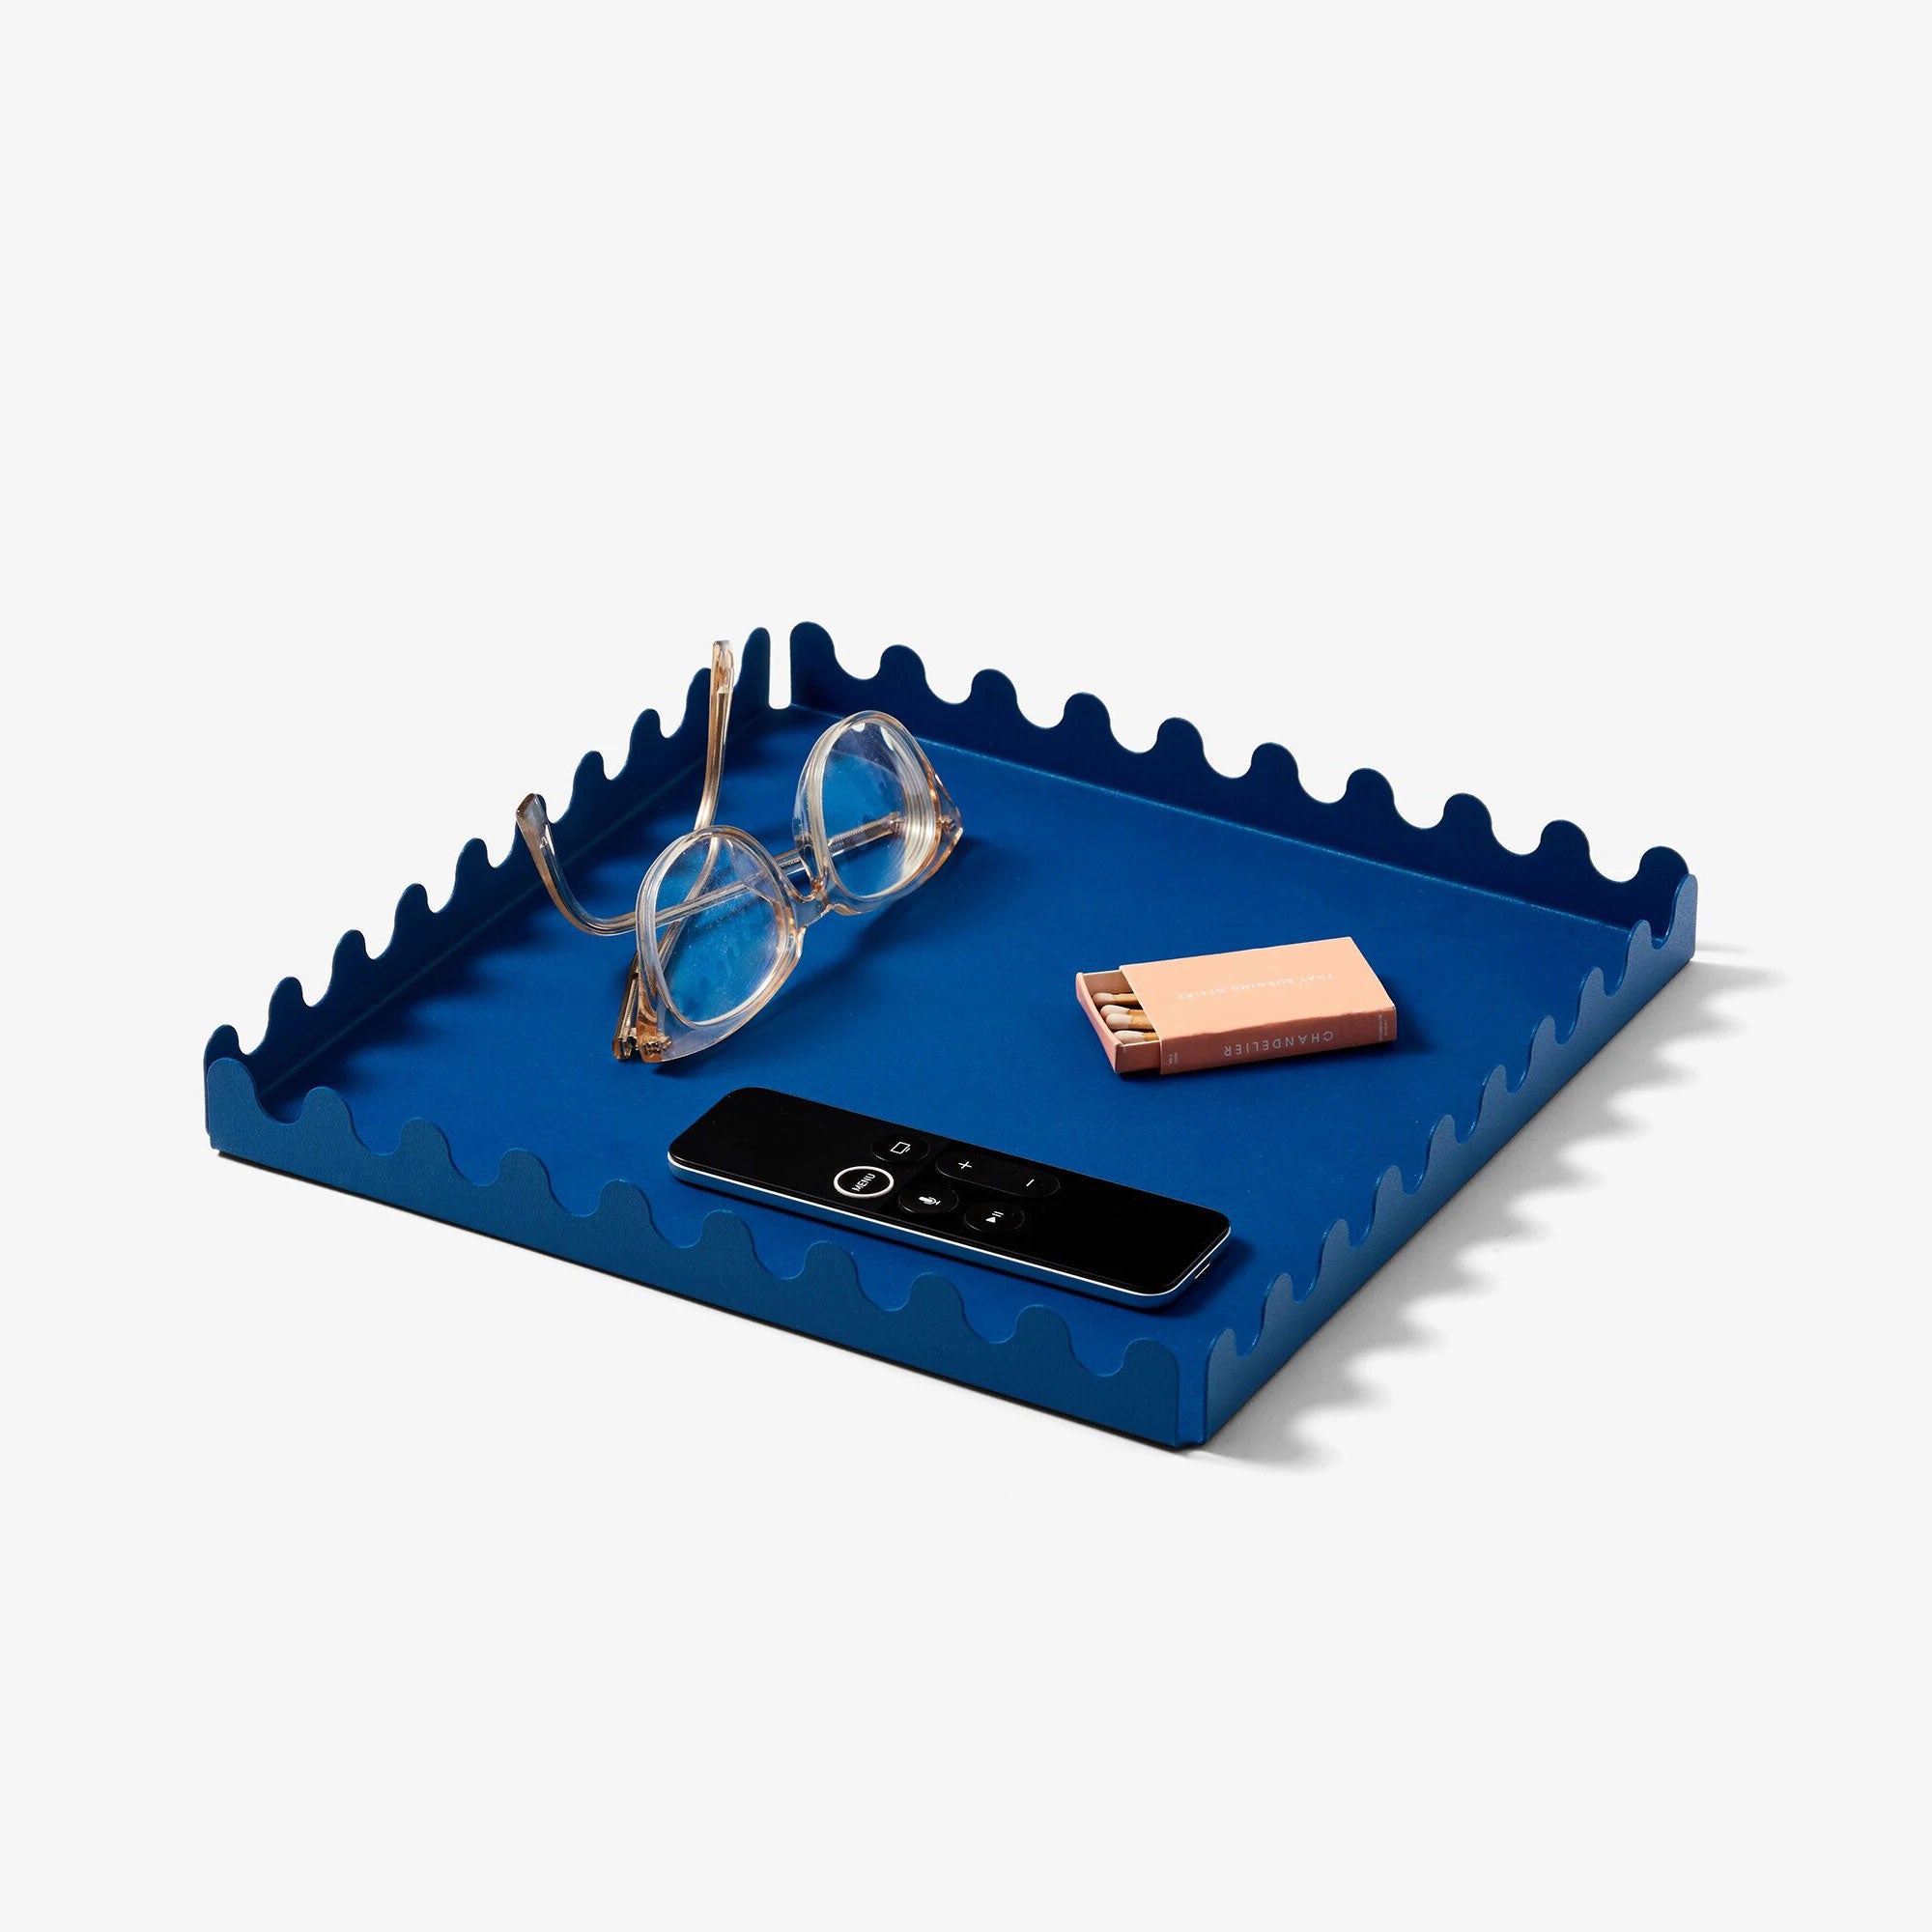 Areaware Scape Tray - Blue